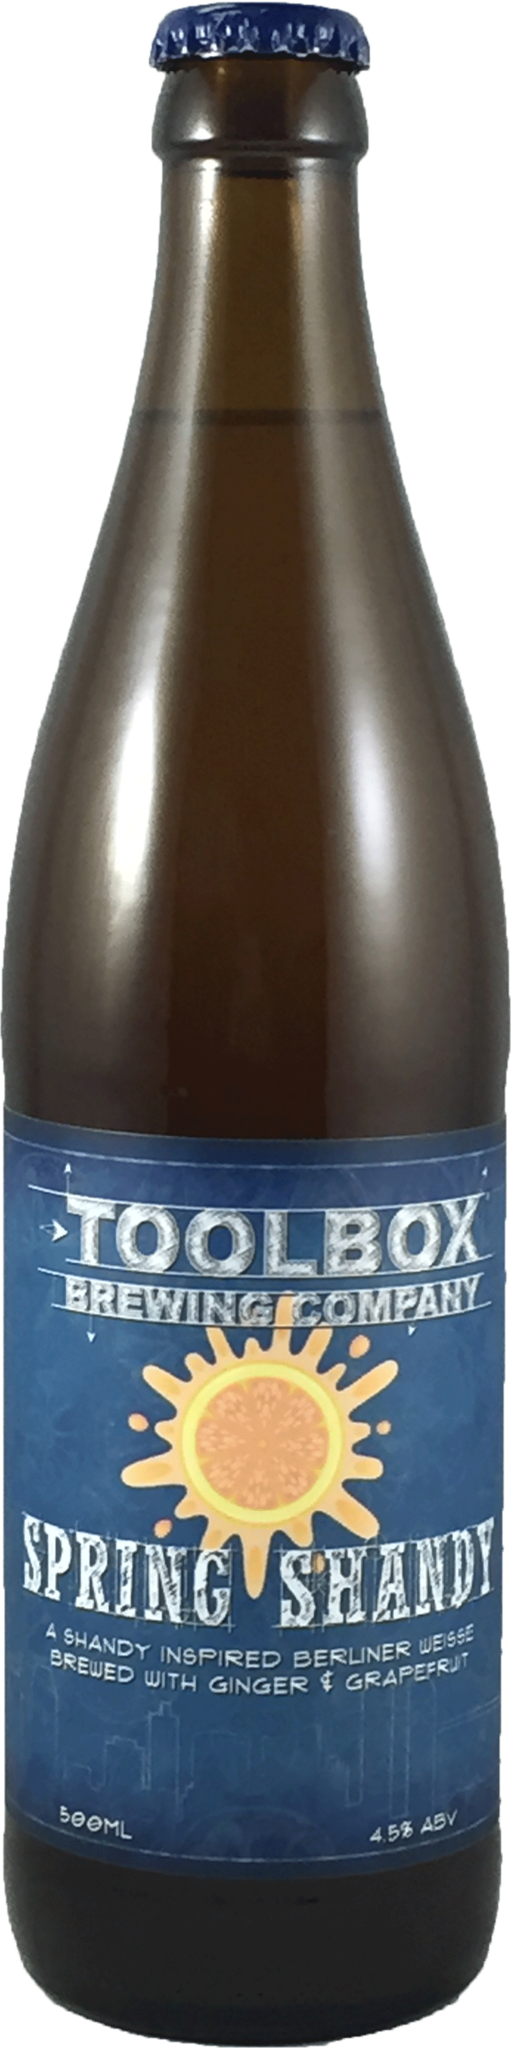 Toolbox Brewing Company Spring Shandy 500ml LMT 6